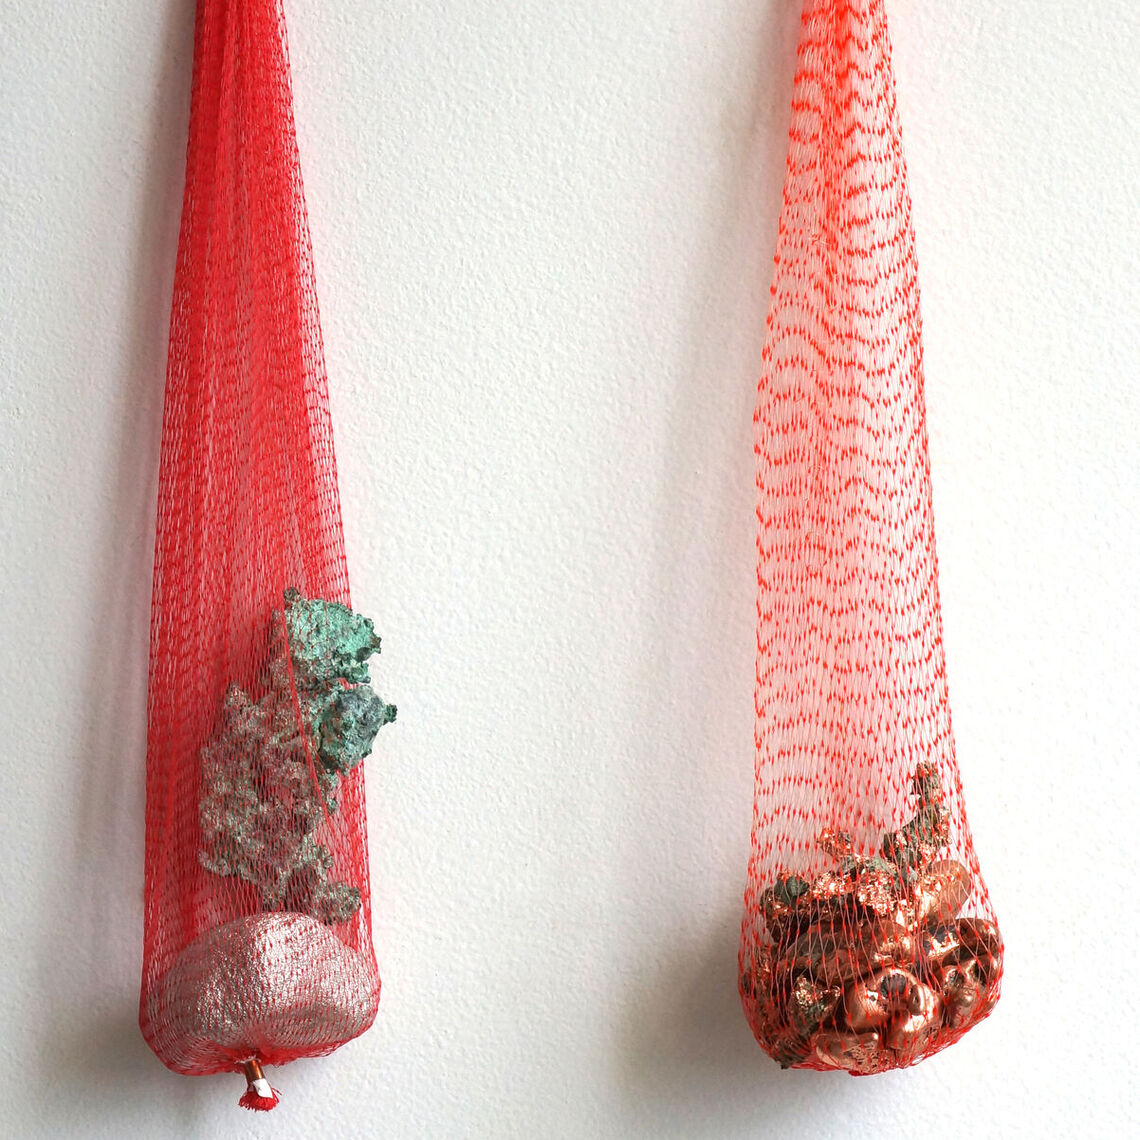 Inhabit (Copper), 2021.
Copper in three different states, plastic mesh sleeves for garlic, driftwood, glass beads.